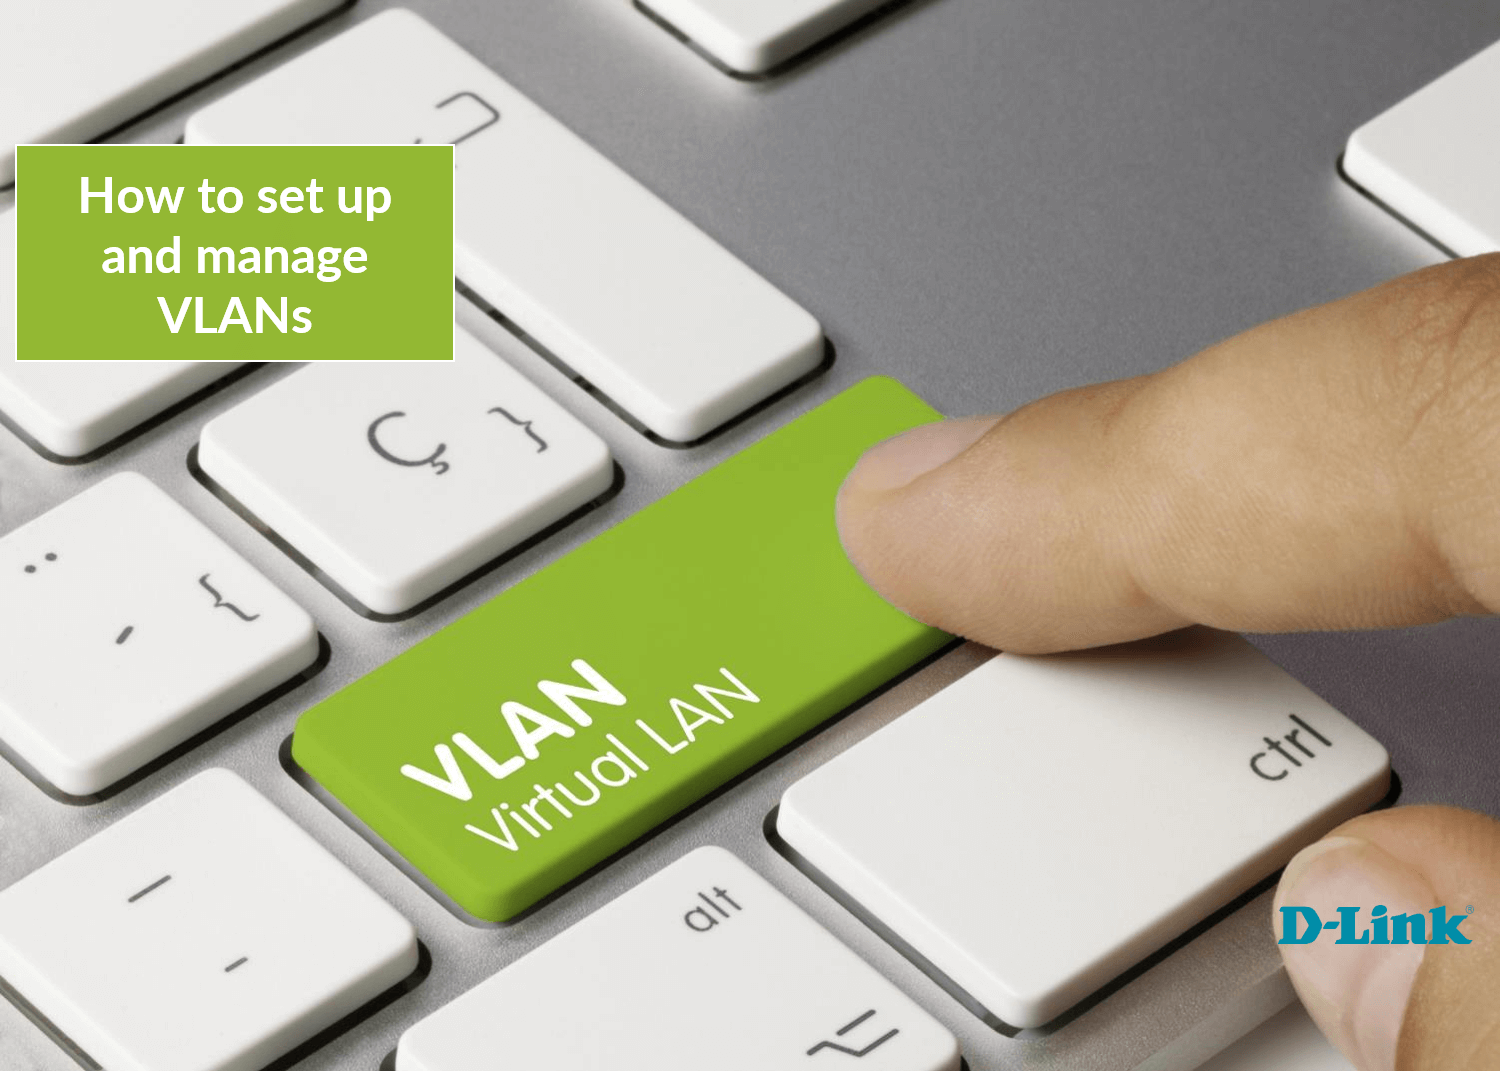 How to VLANs